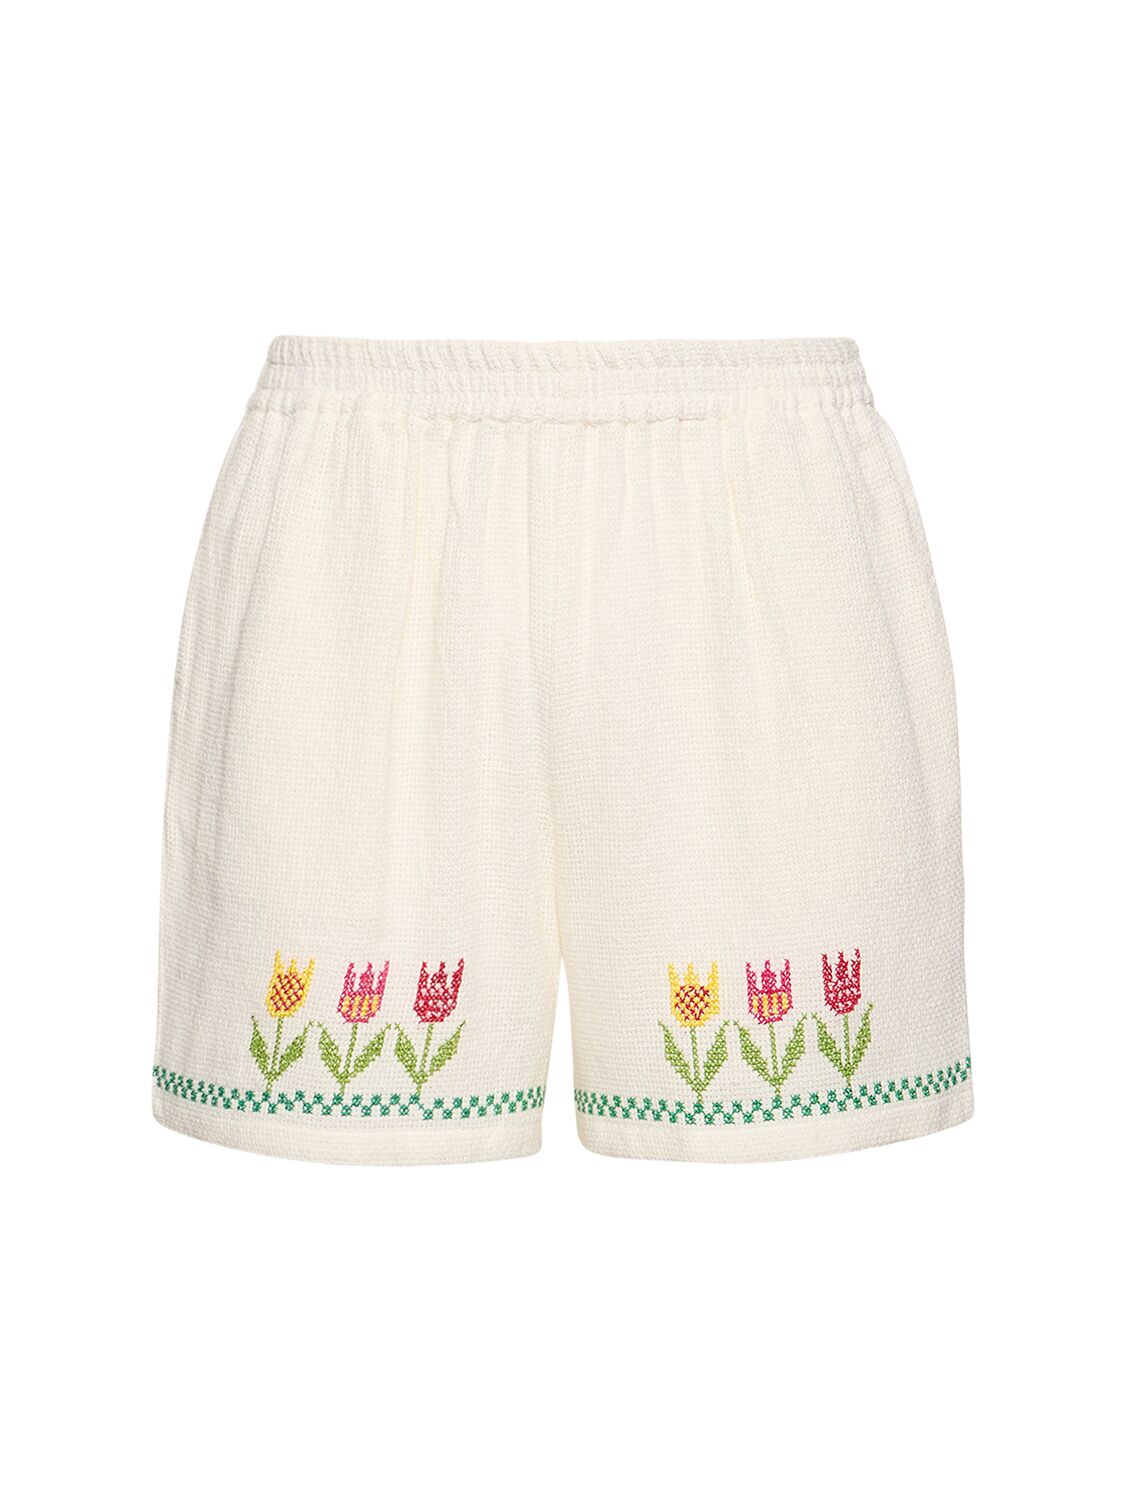 Image of Tulip Cross Embroidered Shorts